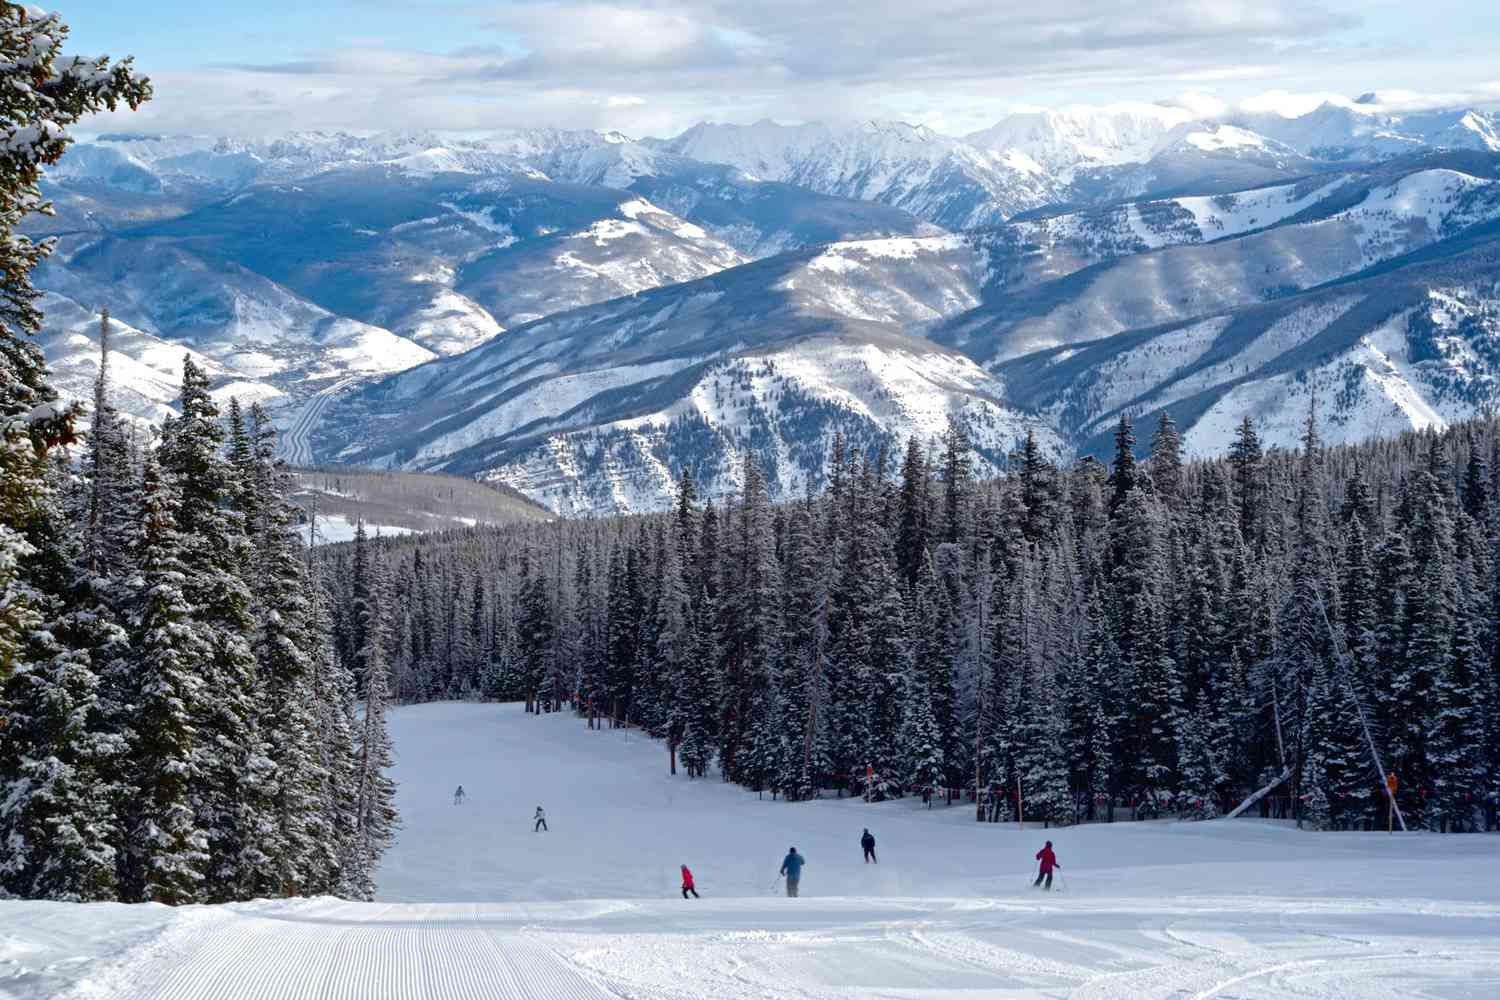 Beaver Creek Resort: A Winter Wonderland for Skiers and Non-Skiers Alike